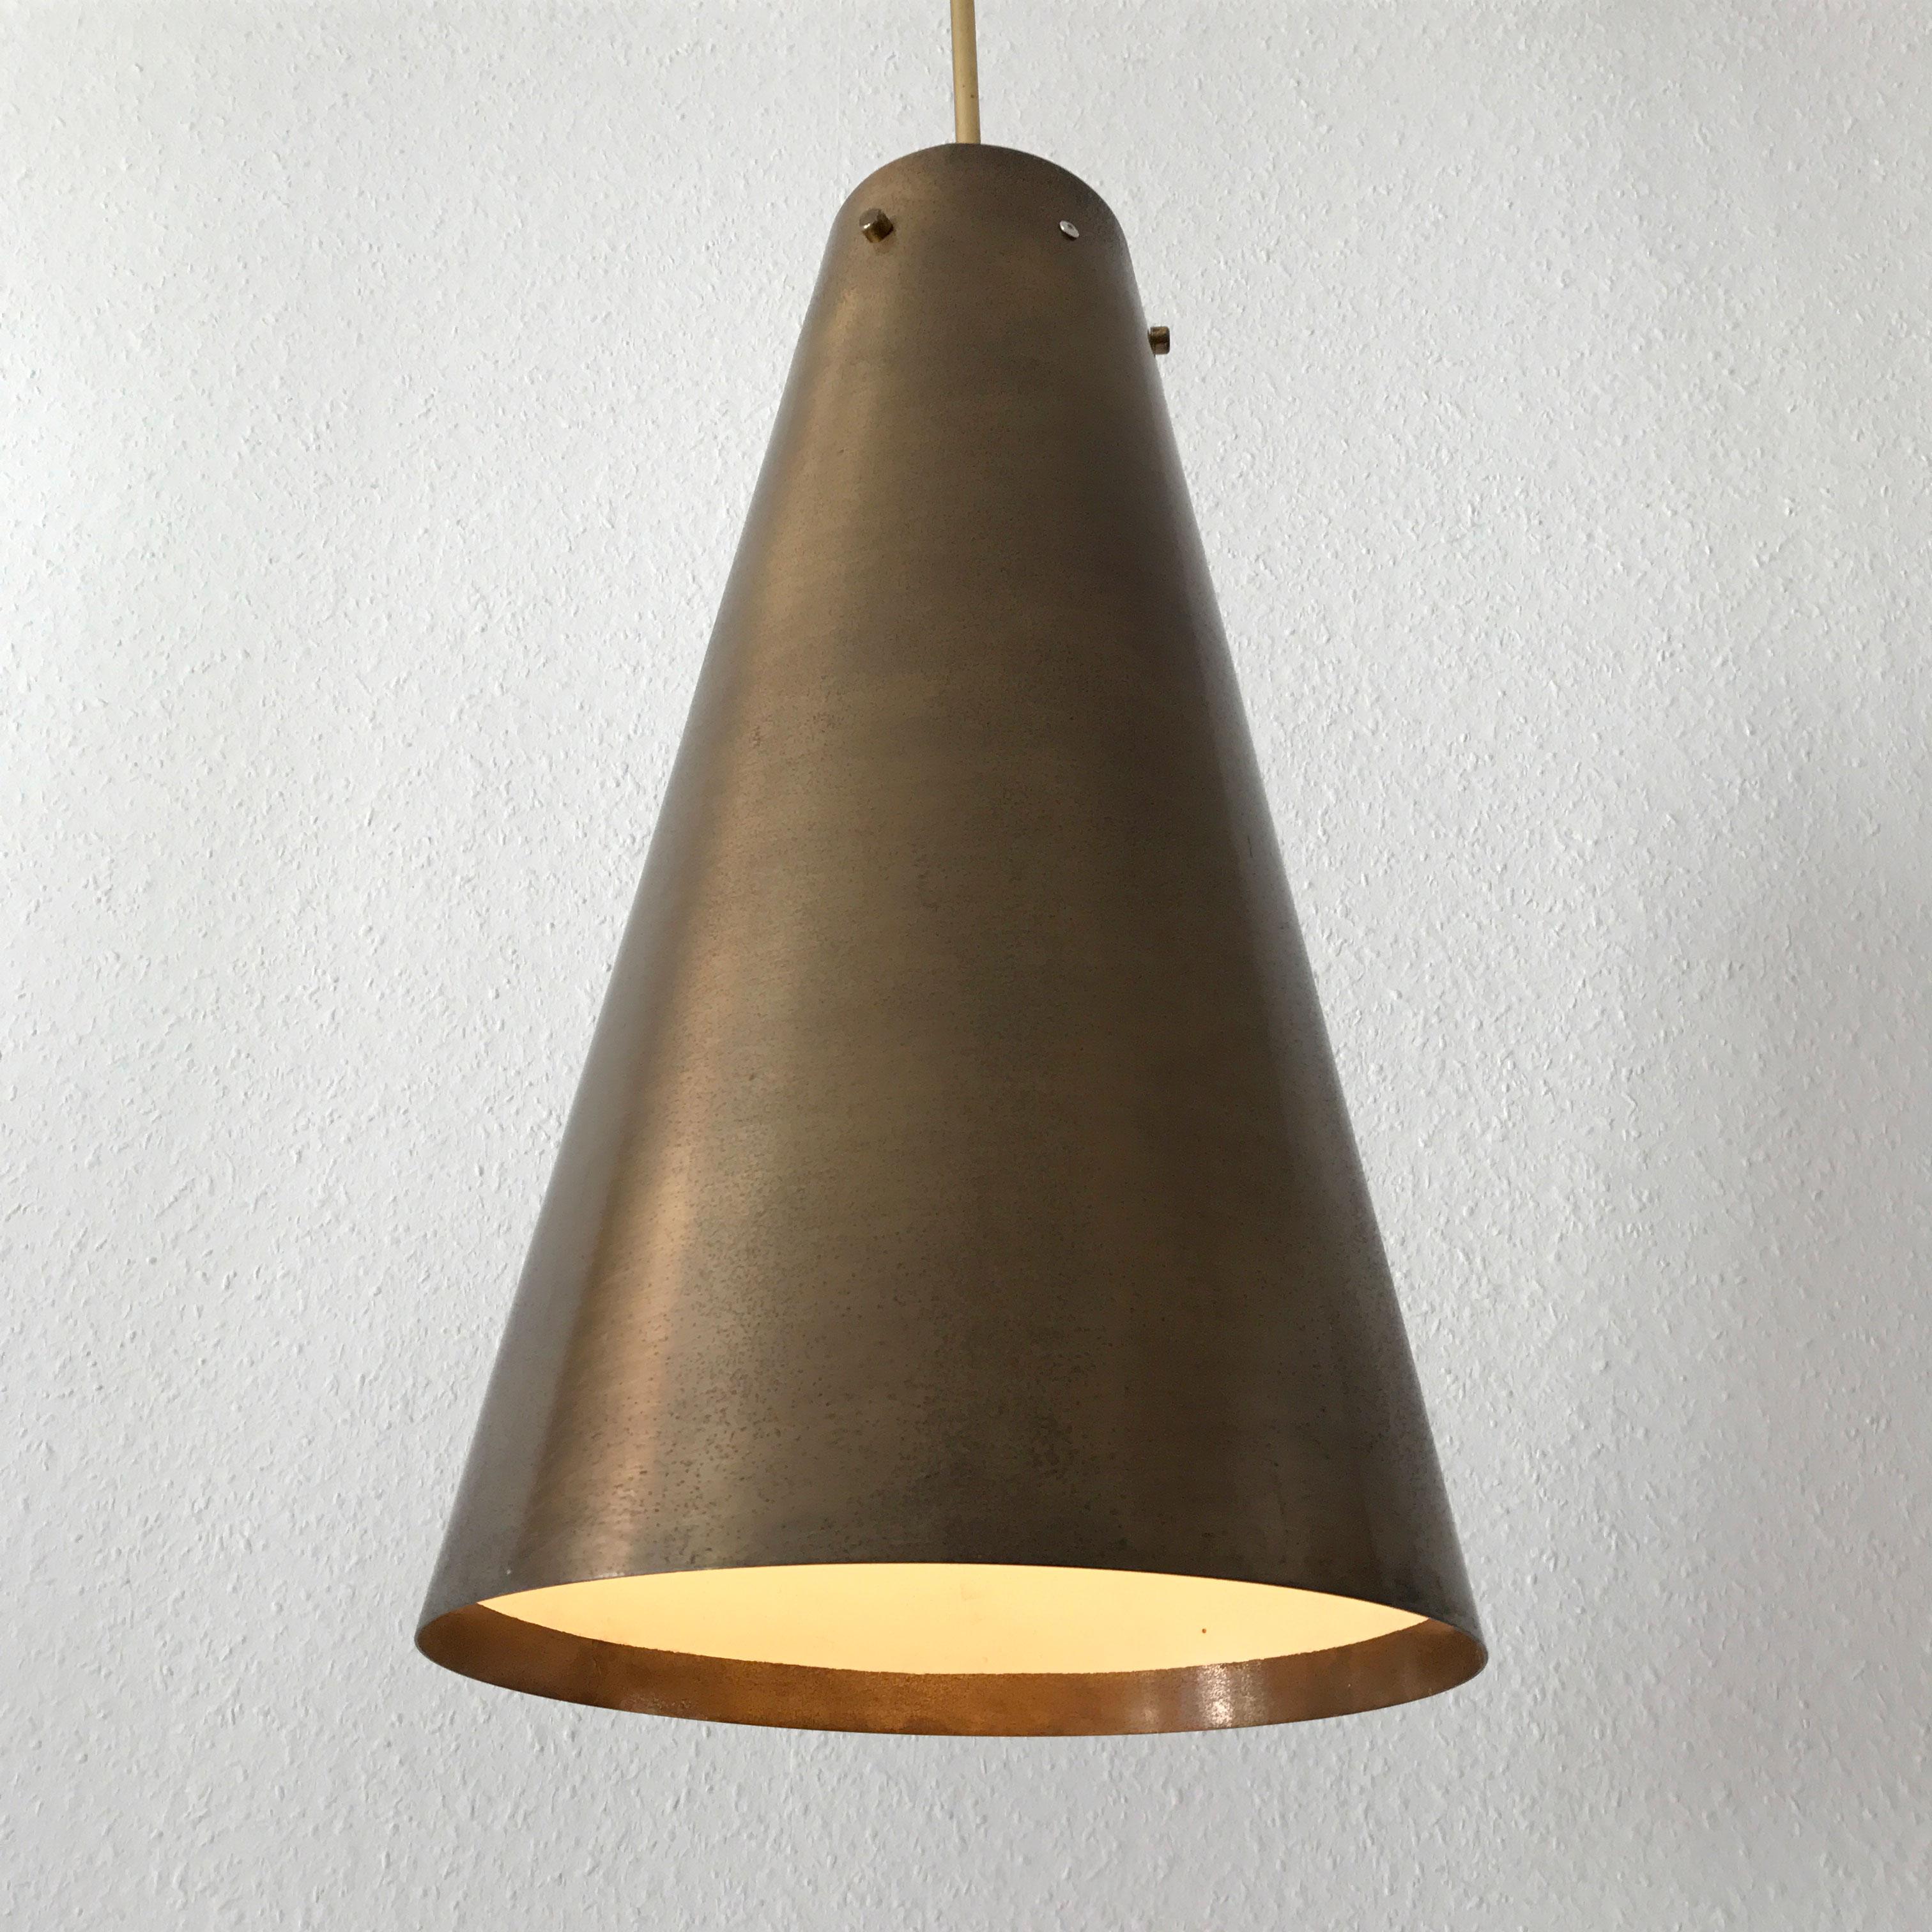 Stunning Mid-Century Modern brass pendant lamp. Designed and manufactured in 1950s, Germany.

The lamp is executed in brass and has 1 x E27 Edison screw fit sockets. It is wired, and in working condition. It runs both on 110 / 230